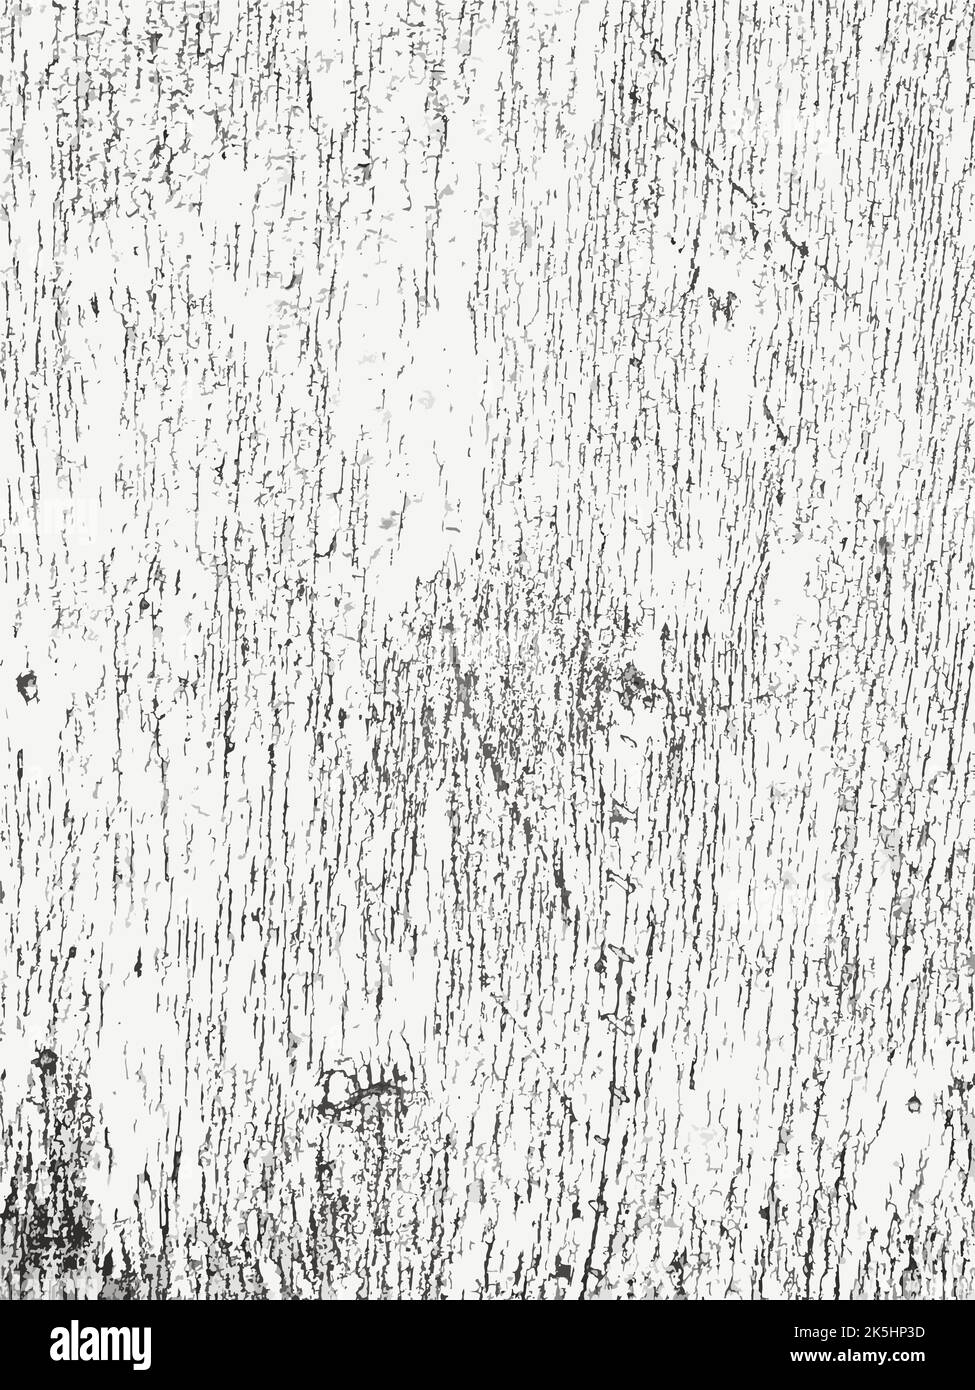 Grayscale grunge wooden texture. Rough overlay background of old weathered wood. Scratched, scarred backdrop with distress effect for some design. Vec Stock Vector